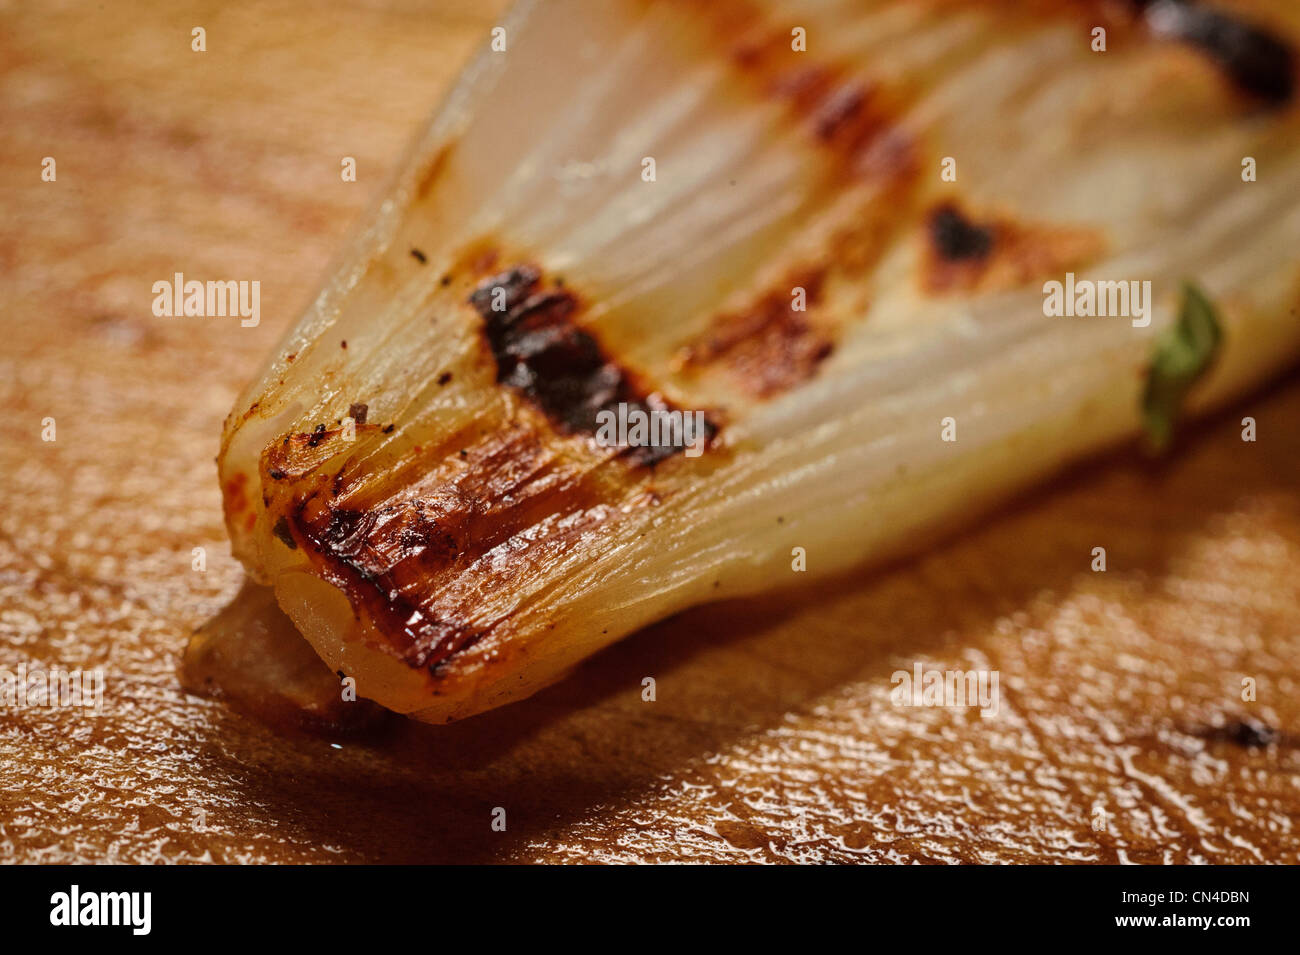 fried onion on wooden cutting board Stock Photo